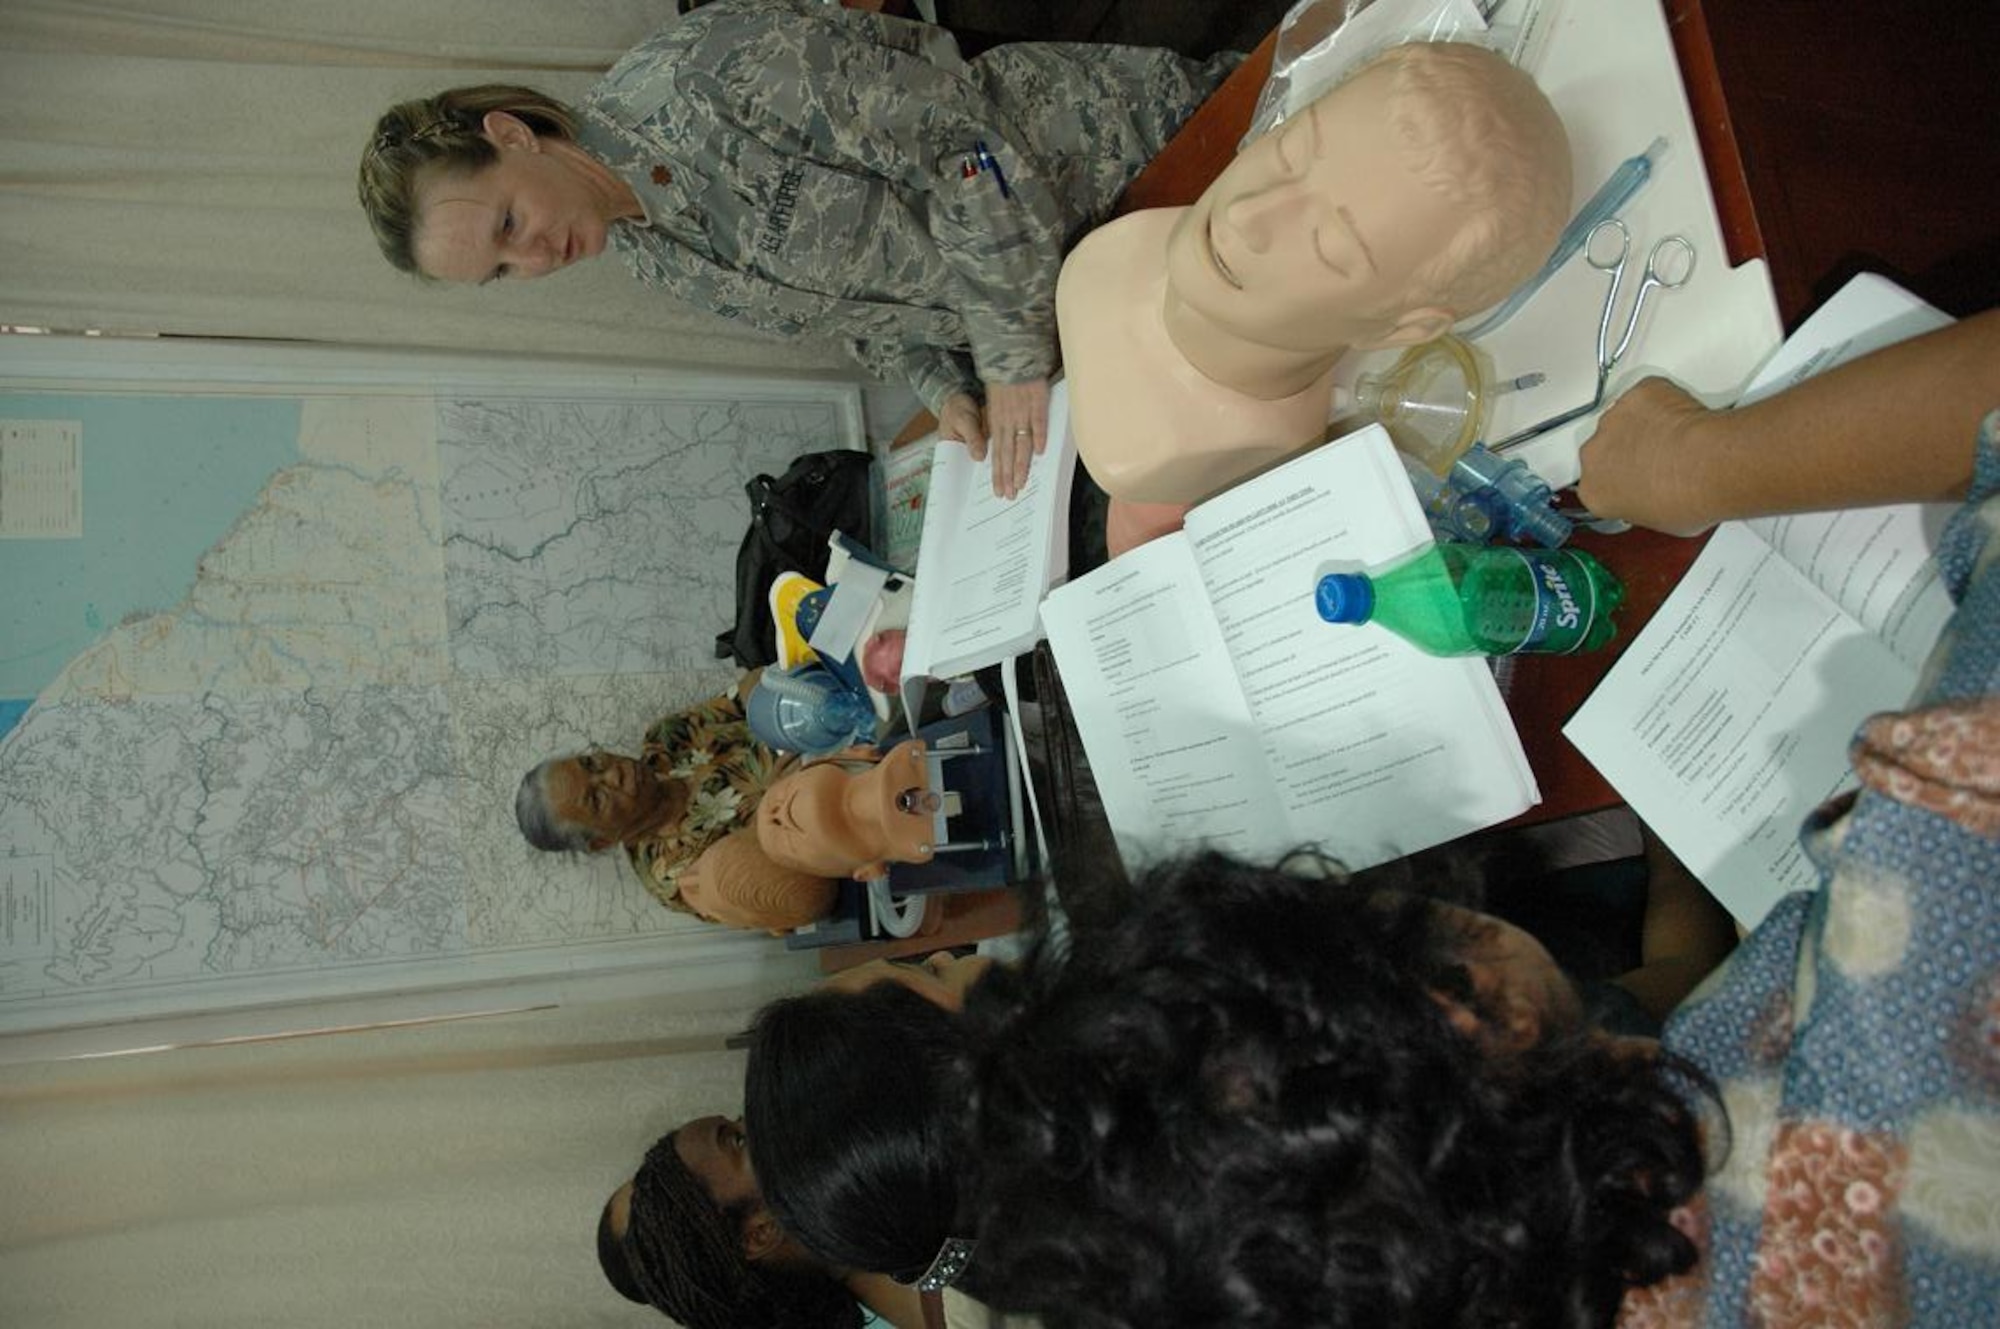 Capt. Kimberly Reed (right), chief, clinical operations for the Defense Institute for Medical Operations at Brooks City Base, Texas, leads classroom instruction during the first responders course taught in Georgetown, Guyana June 1-5. (U.S. Air Force Photo by Kevin Walston)